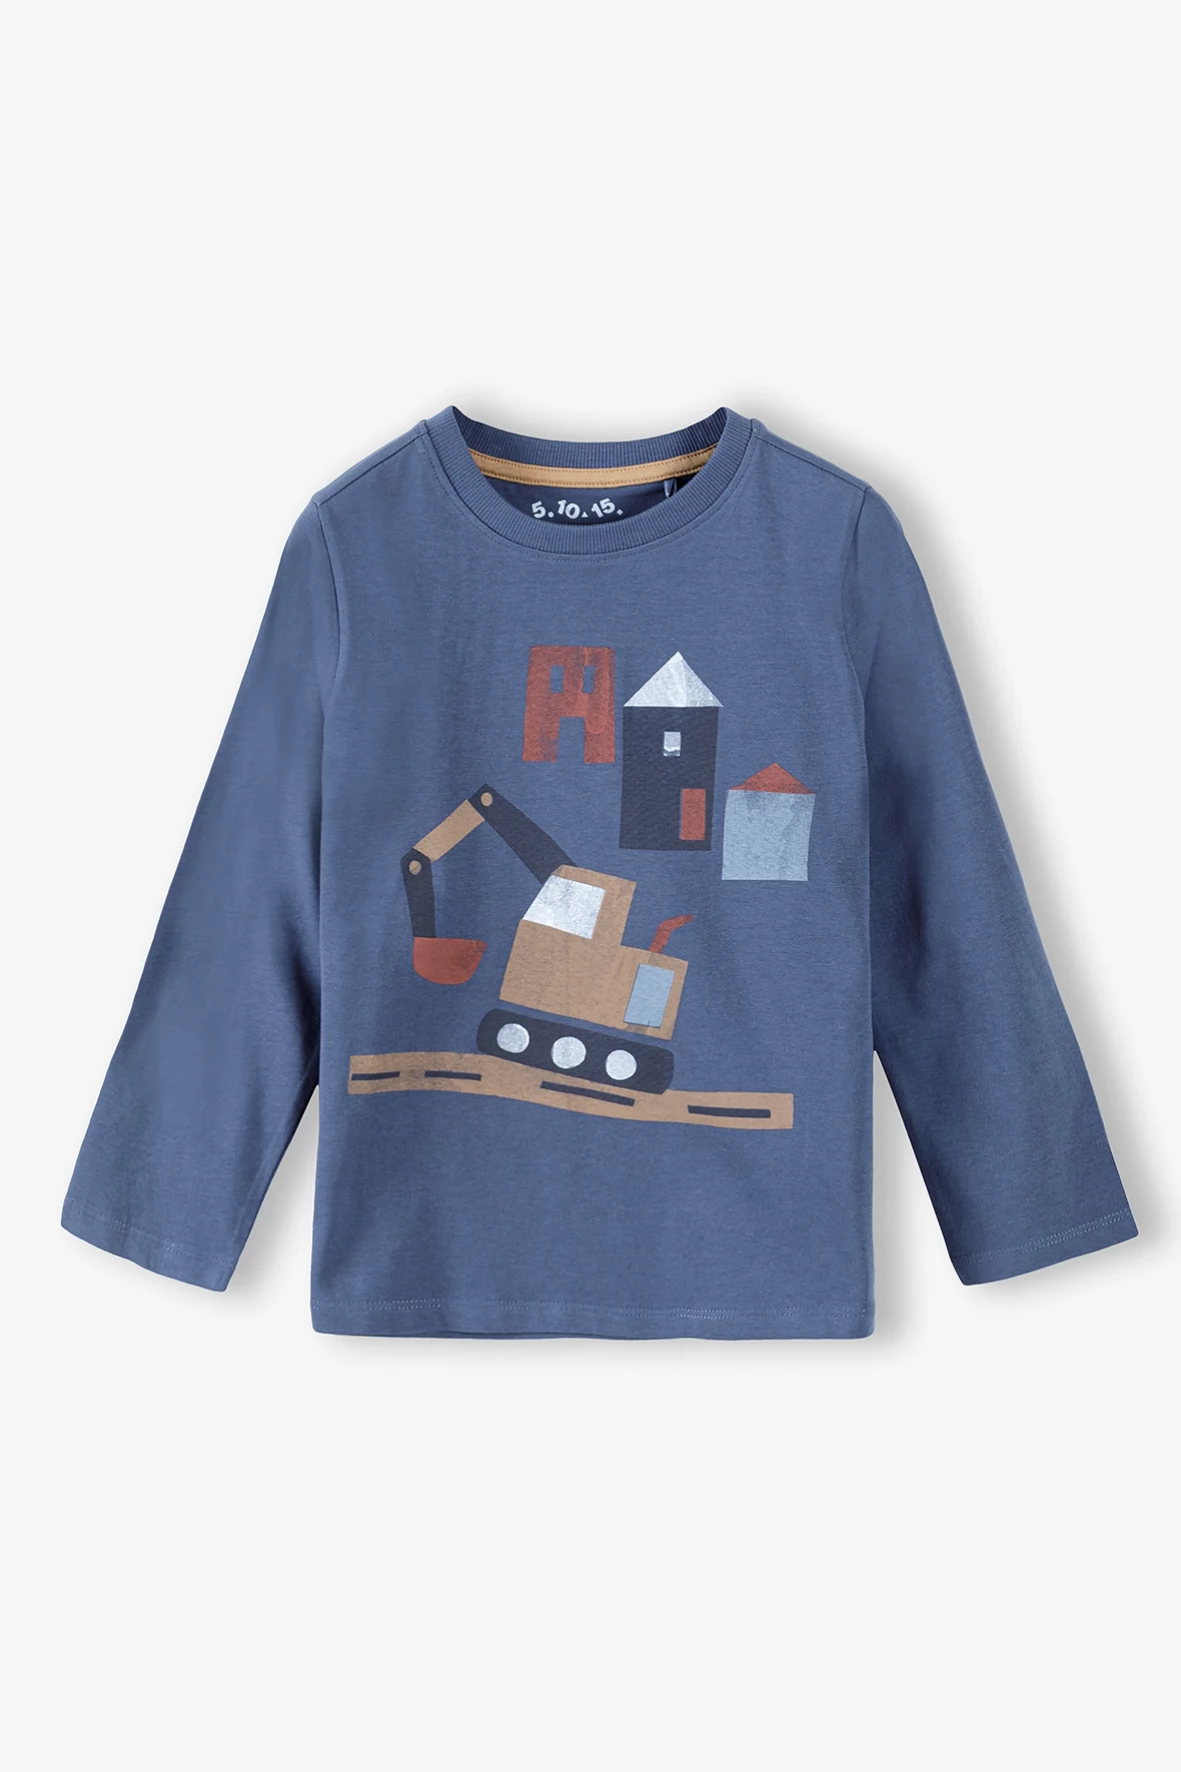 Blue T-shirt with an excavator